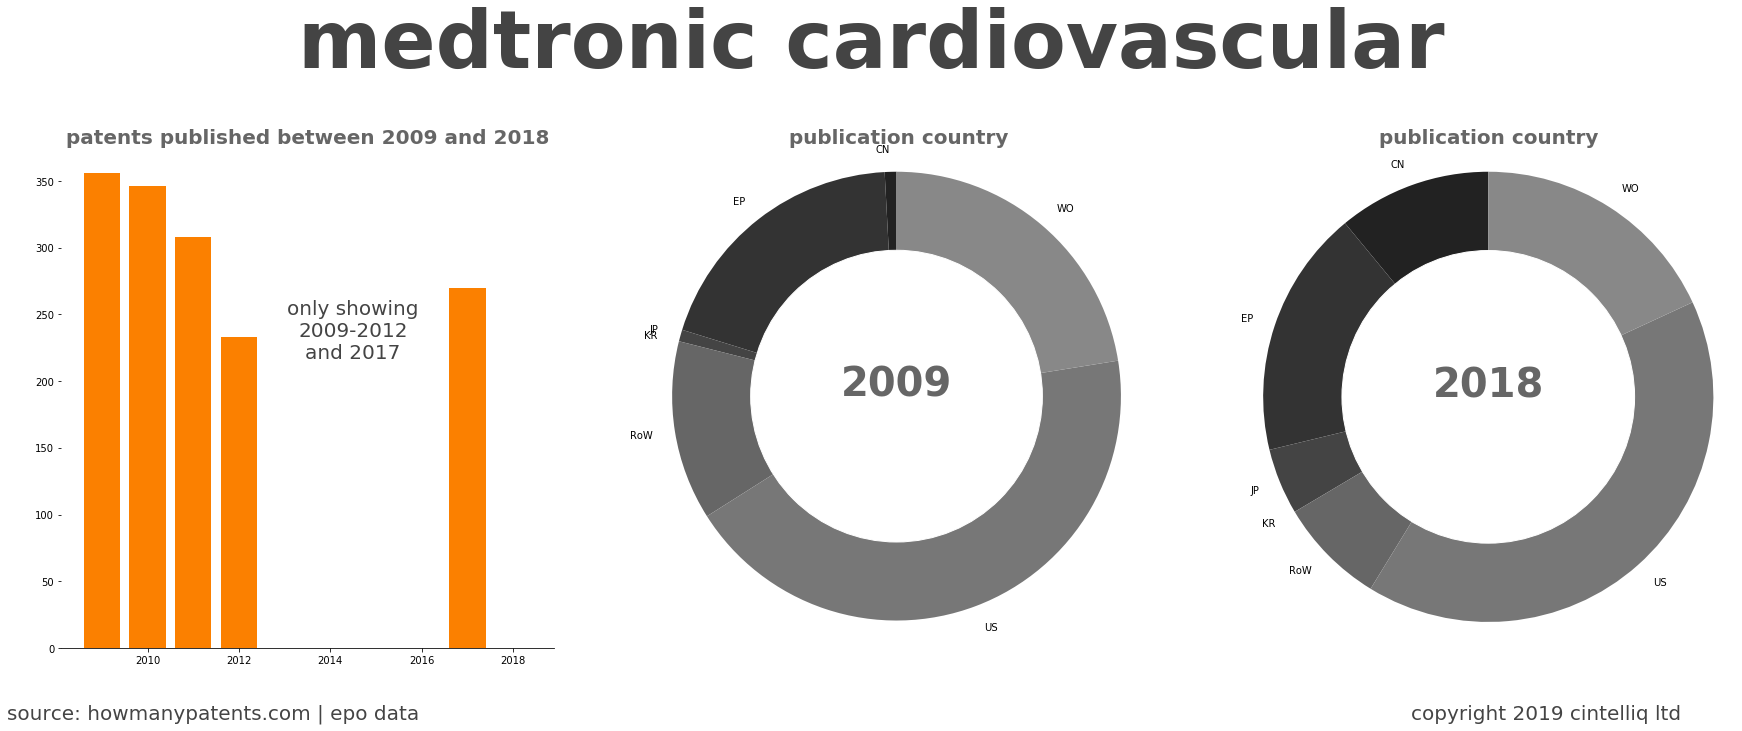 summary of patents for Medtronic Cardiovascular